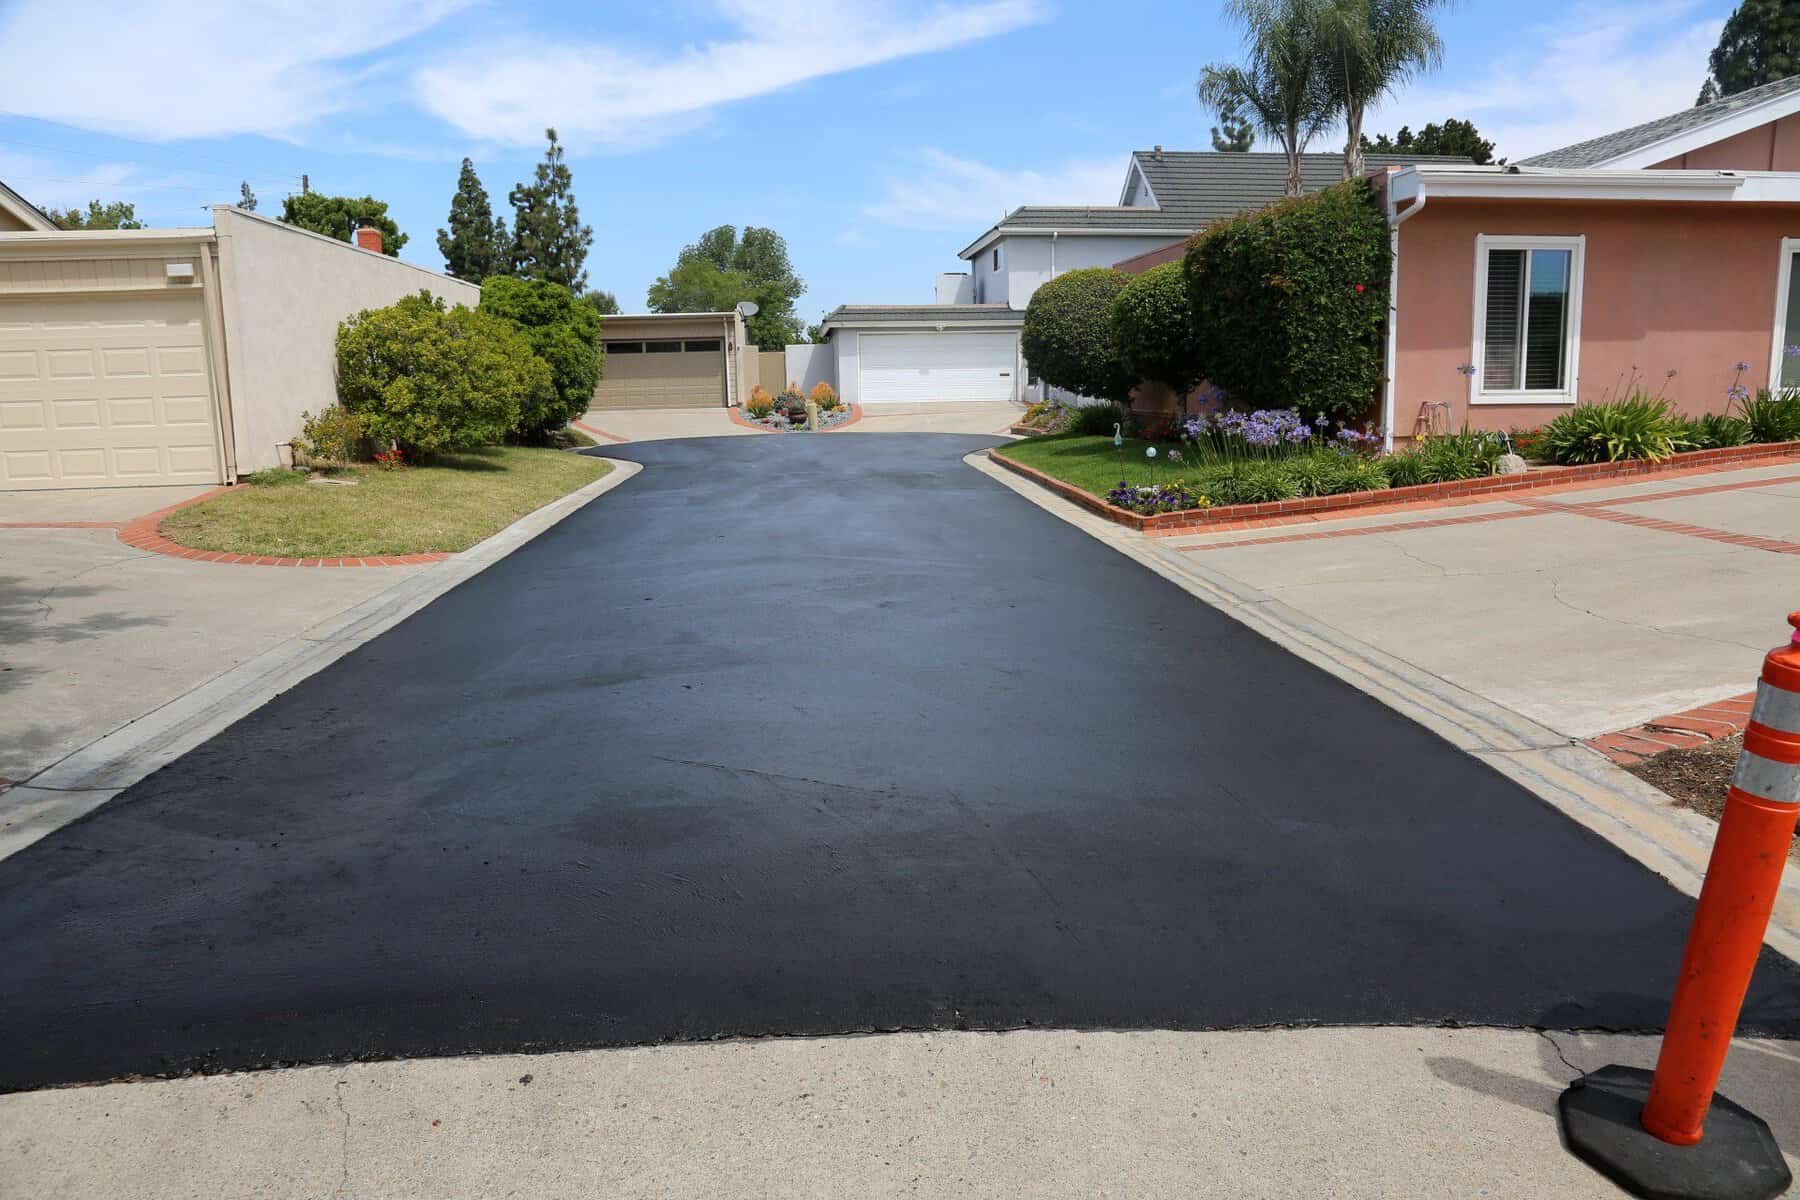 The homeowners are protecting their driveway from the sun, water, and chemicals by sealcoating it.